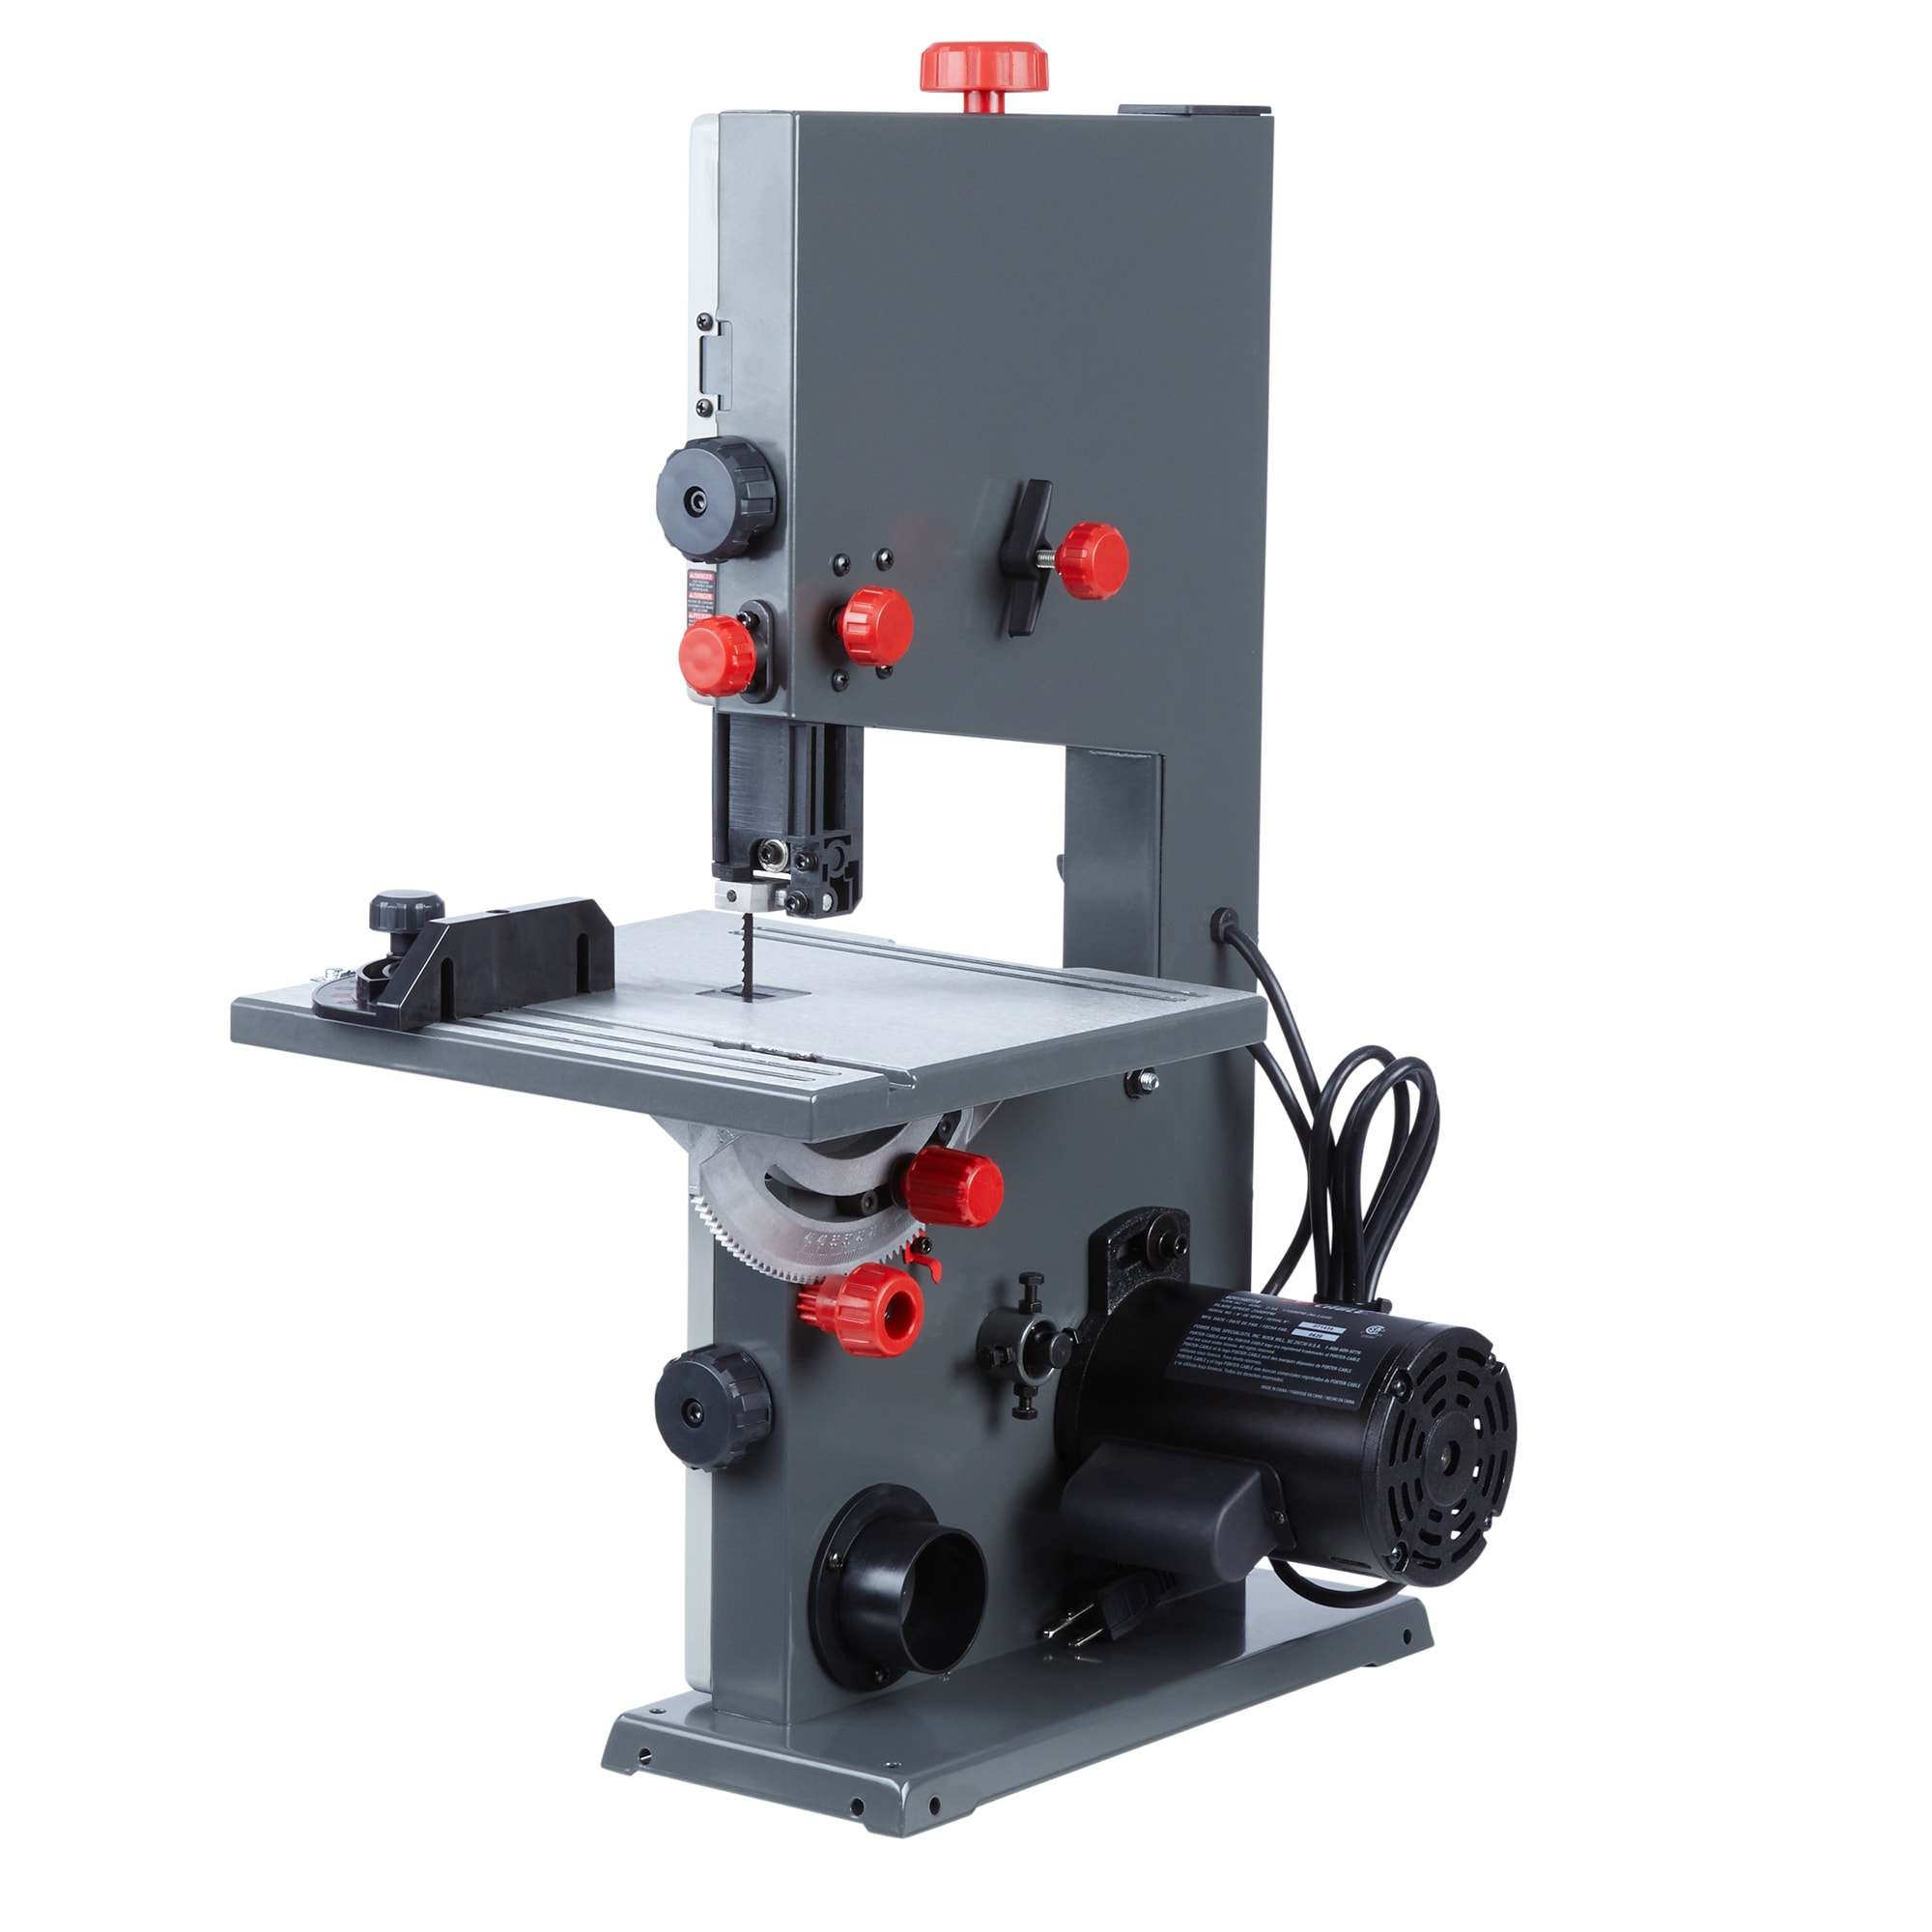 PORTER-CABLE 9-in 2.5-Amp Stationary Band Saw in the Stationary